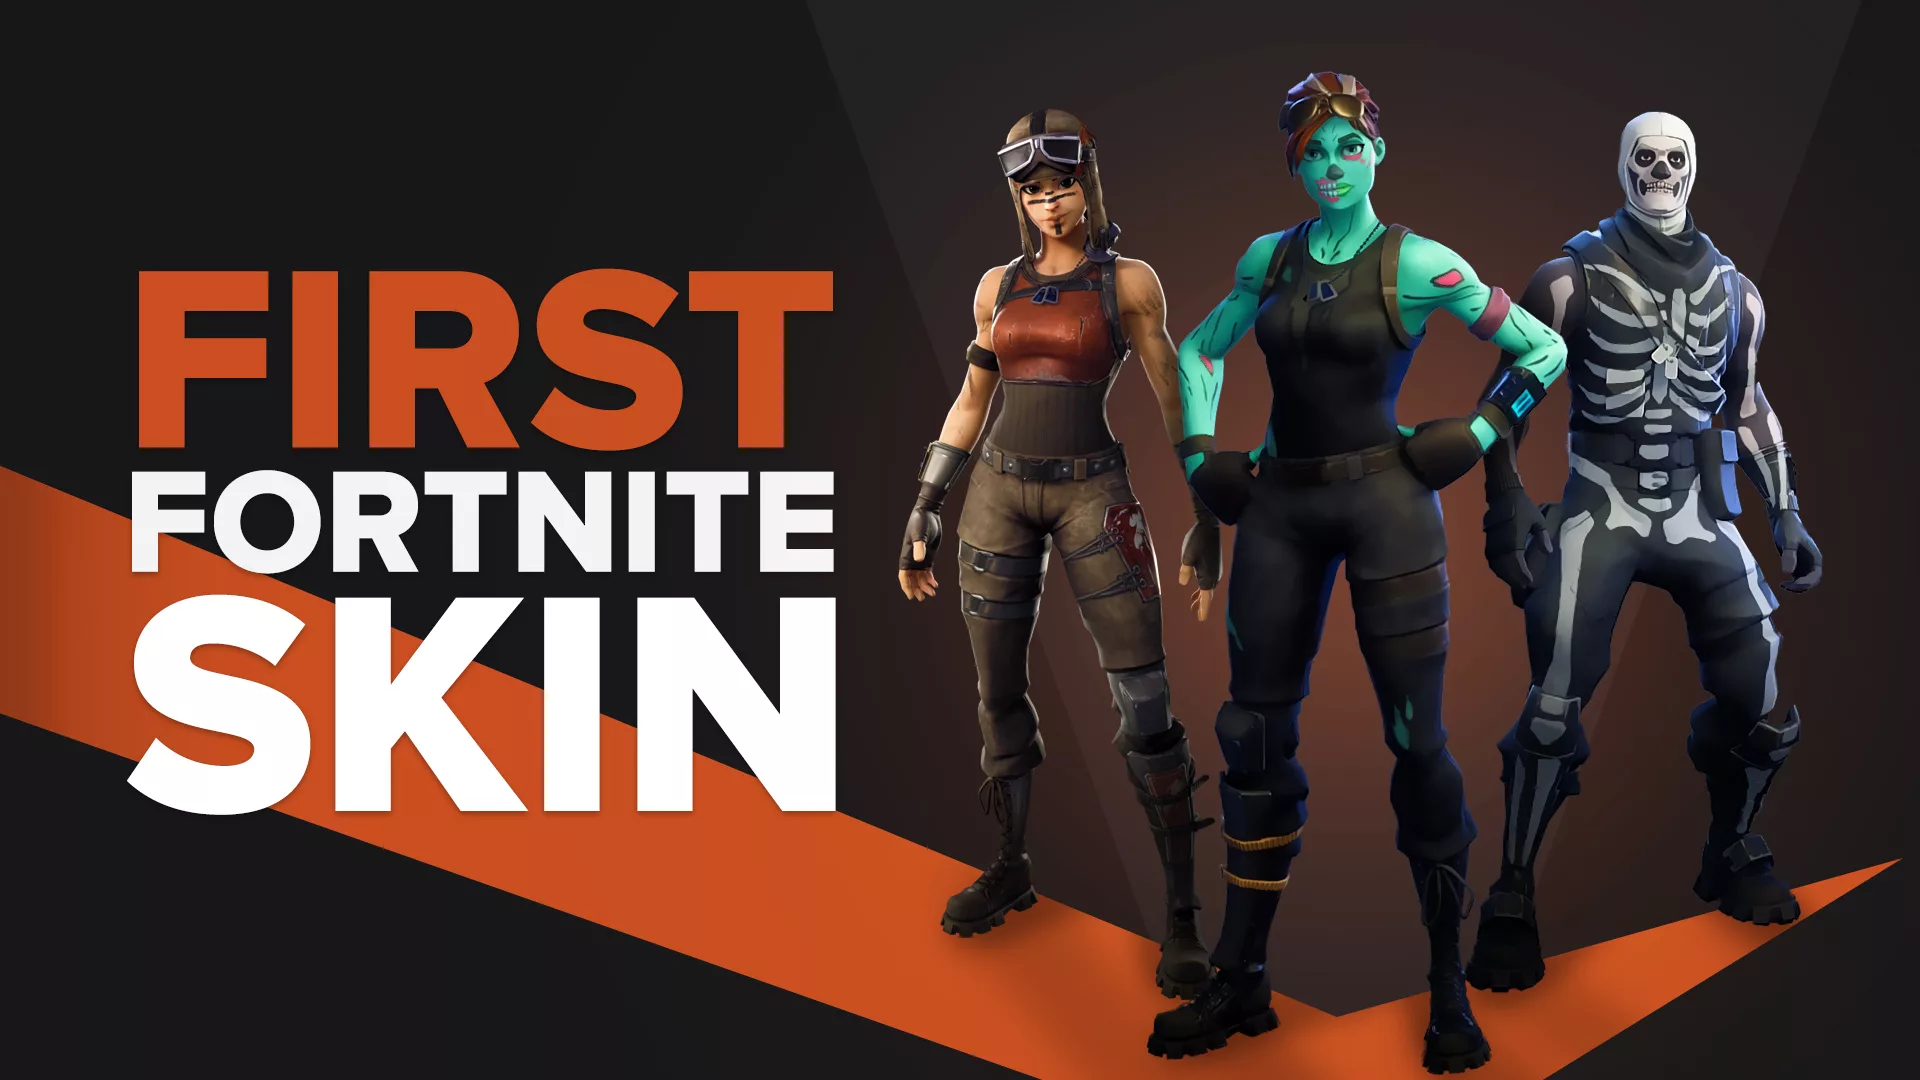 What Was the First Fortnite Skin Ever Released?